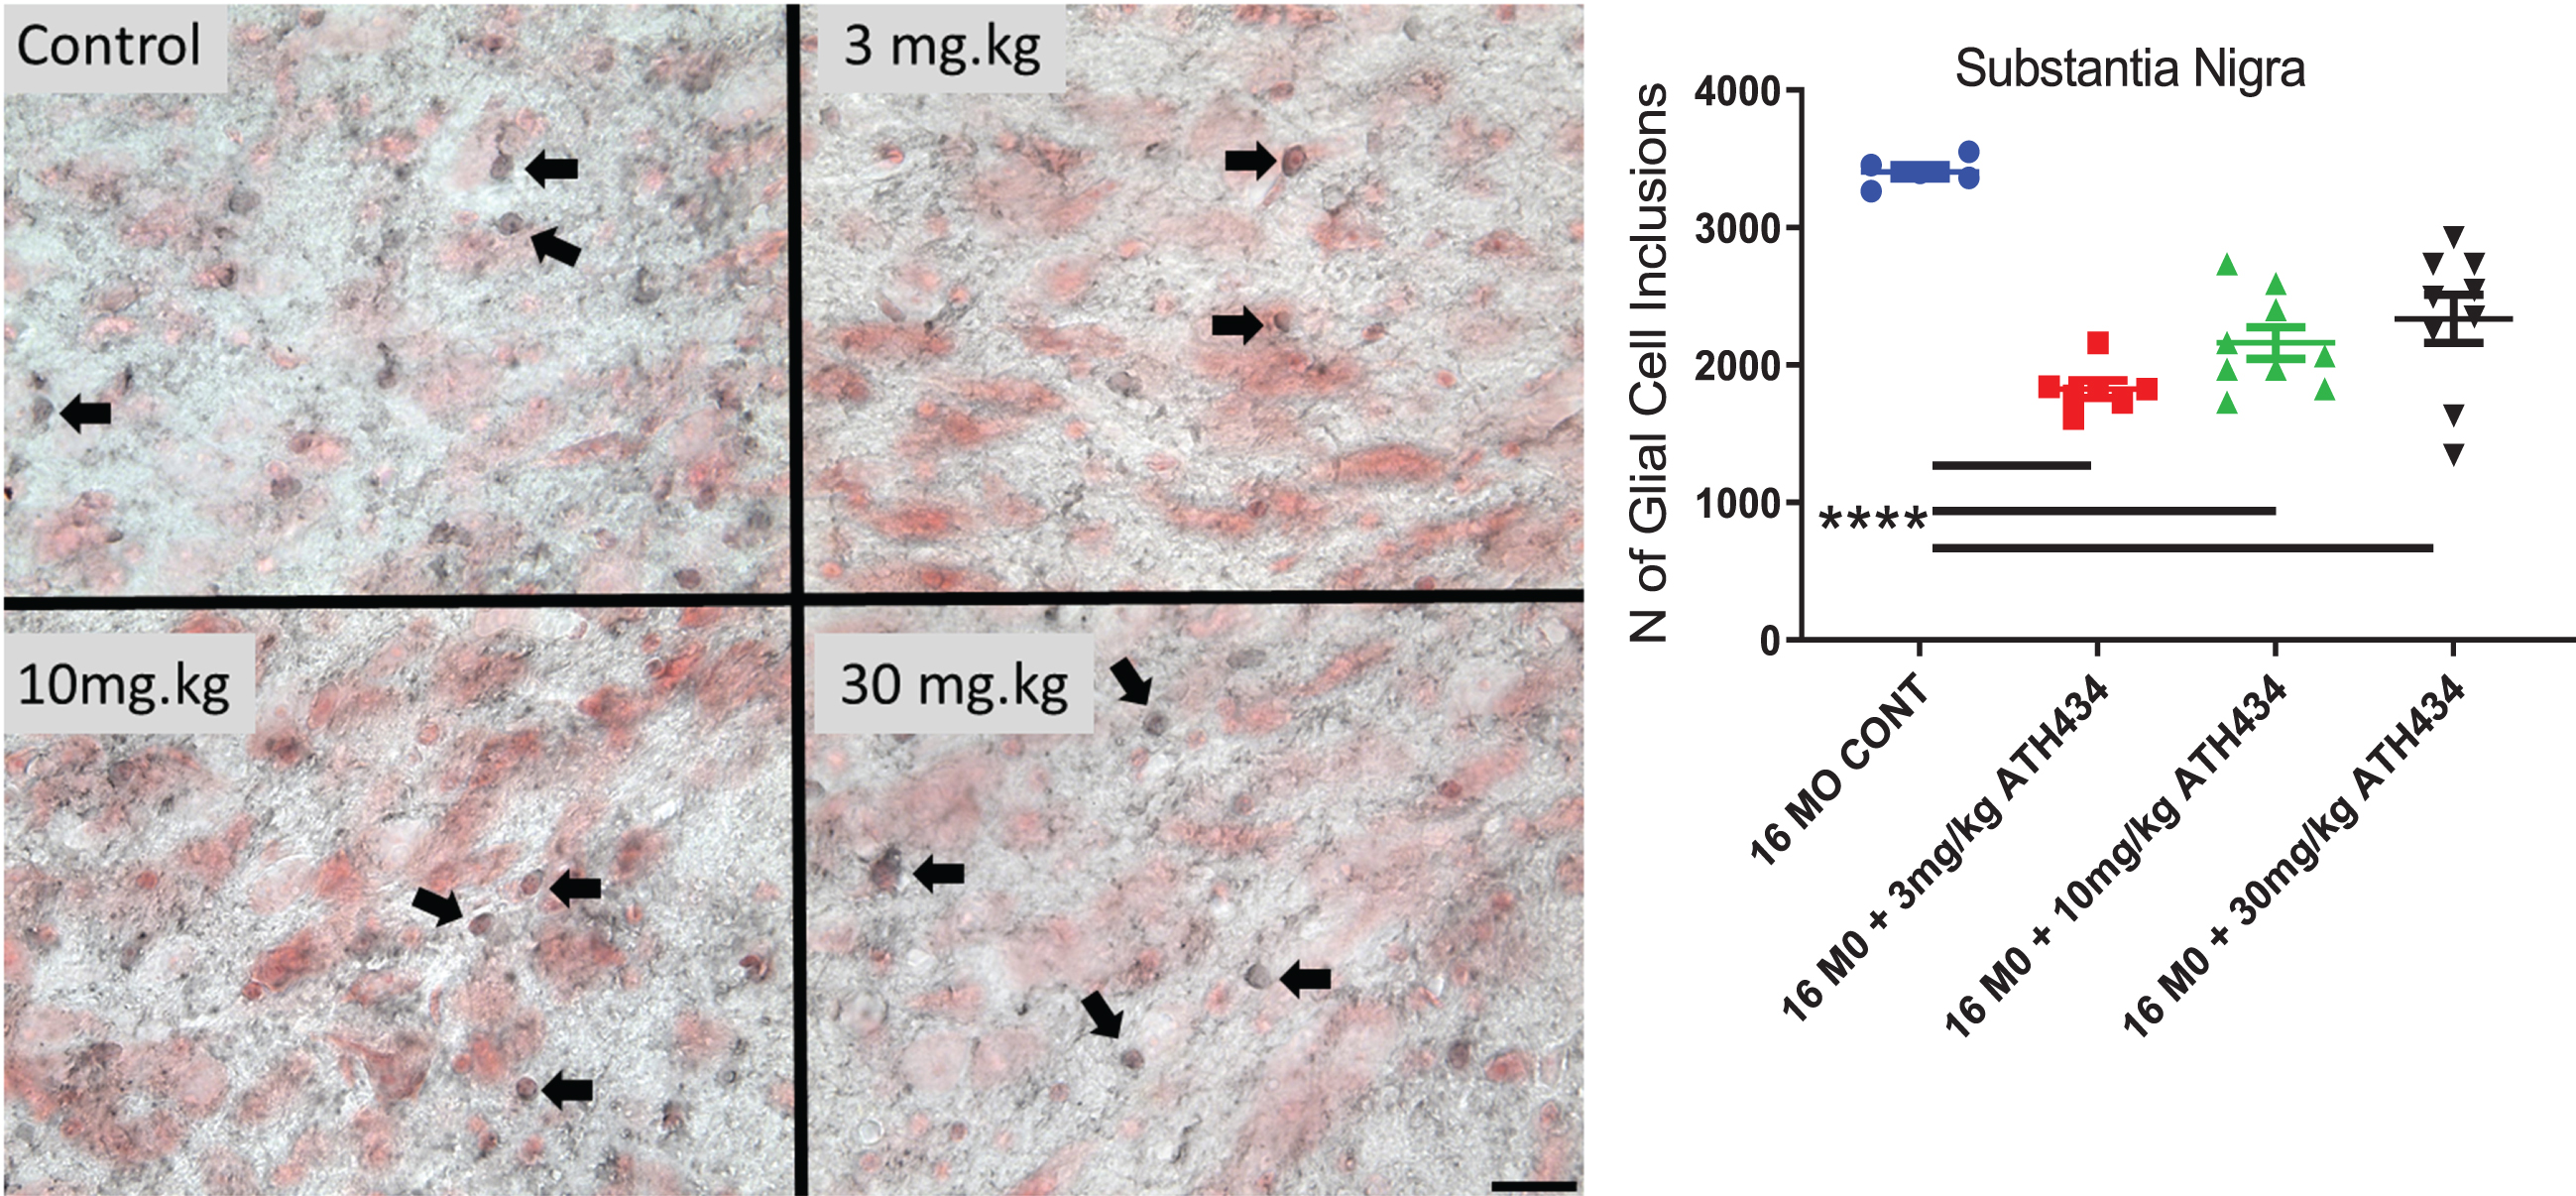 The number of Glial Cell Inclusions (dark staining, Arrows) in the Substantia Nigra pars compacta (neurons red staining) in 16-month PLP-α-syn mice. Four months of treatment with ATH434 in various doses reduced the number of GCI within the SN (Mean±SEM, Ordinary ANOVA, F = 19.98, p < 0.0001). One way ANOVA with Dunnett’s Post hoc test comparing to the 16-month untreated animals indicated that 3 mg/kg (46%decrease), 10 mg/kg (37%decrease), 30 mg/kg (31 %decrease) significantly reduced the number of GCI p < 0.0001. (16 MO CONT vs. 3 mg/kg p≤0.0001; 16 MO CONT vs. 10 mg/kg p≤0.0001; 16 MO CONT vs. 30 mg/kg p≤0.0001) Panels show photomicrographs showing GCIs within the SN (scalebar = 25 microns).